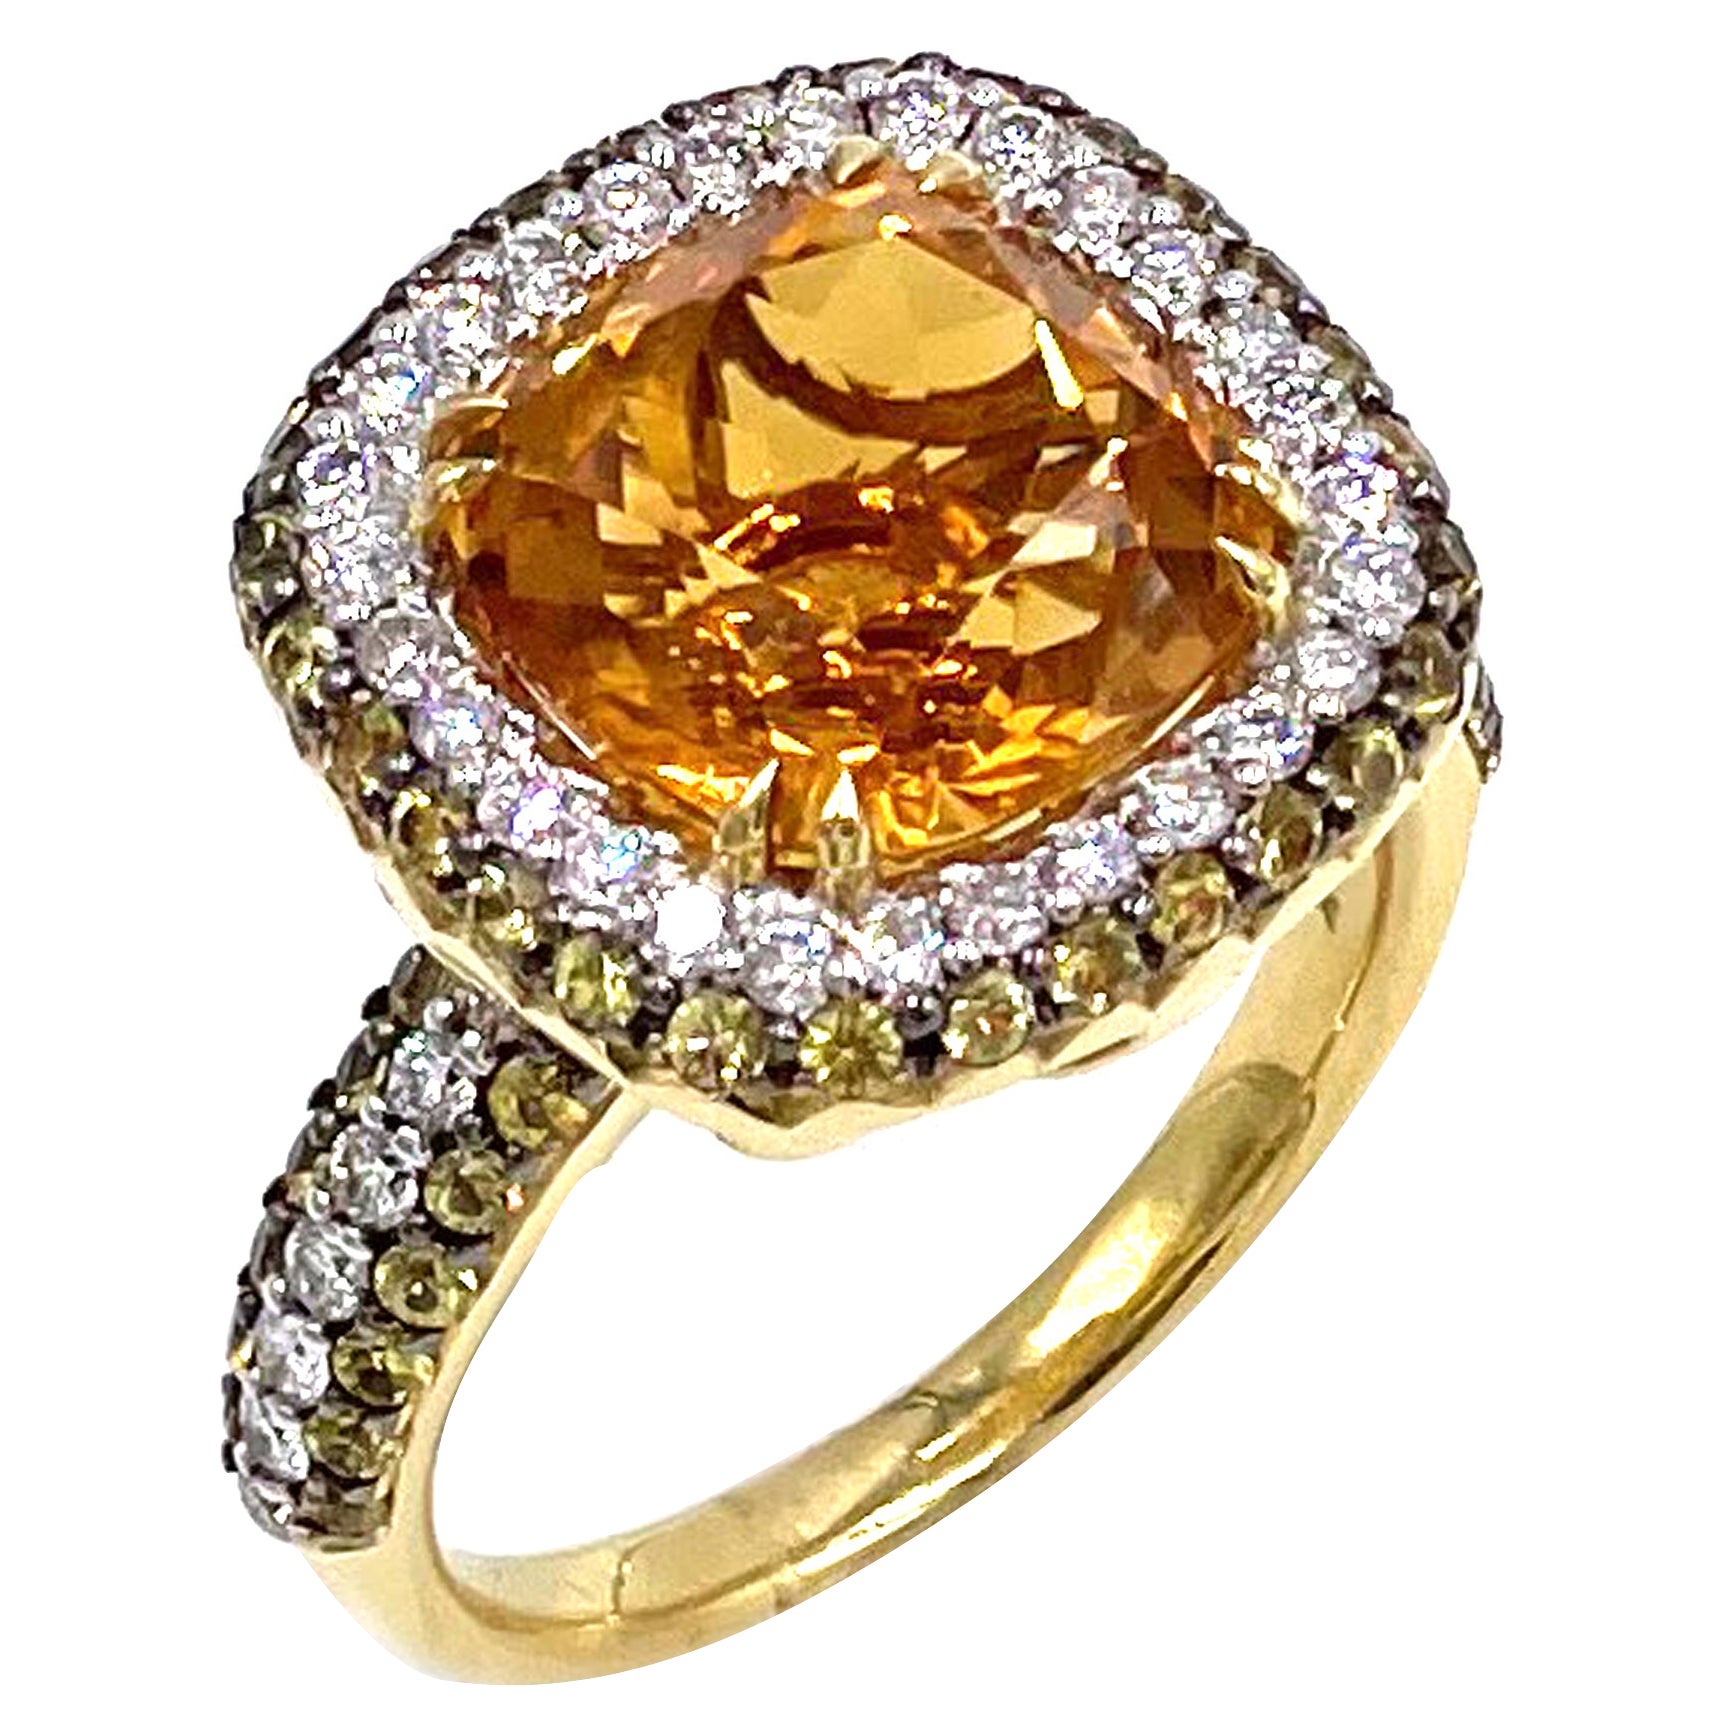 Vanna K 18K yellow gold double cushion halo fashion ring.  The center features one citrine weighing 4.95 carats.  The center stone is surrounded by 0.56 carats round diamond and 0.80 carats yellow sapphires. The ring highlights the yellow sapphires